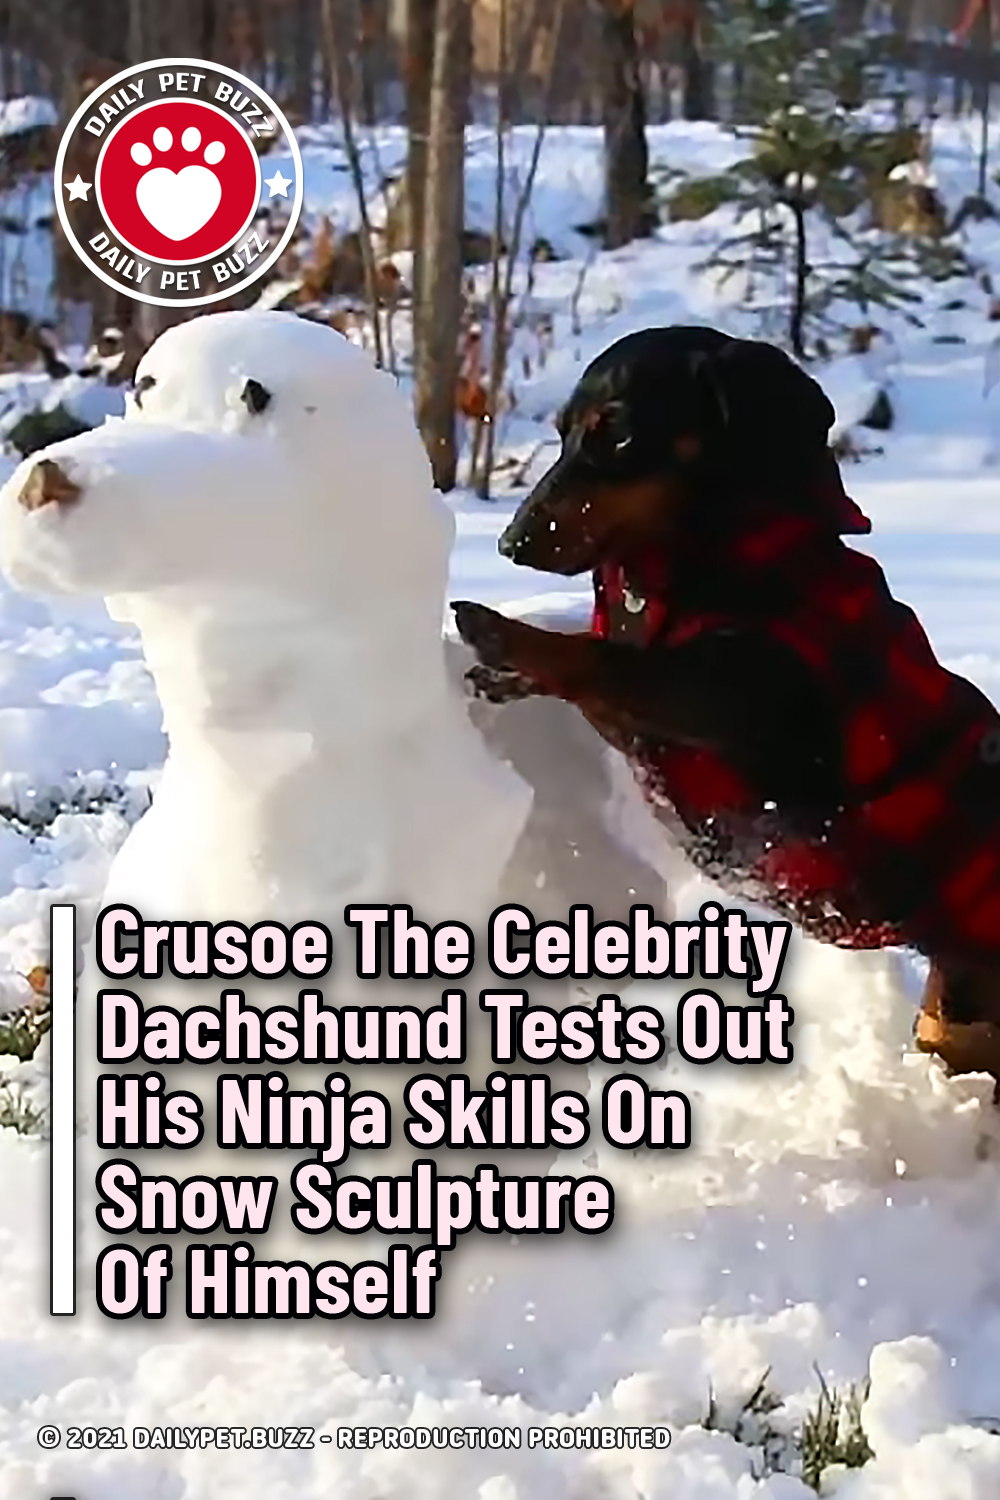 Crusoe The Celebrity Dachshund Tests Out His Ninja Skills On Snow Sculpture Of Himself